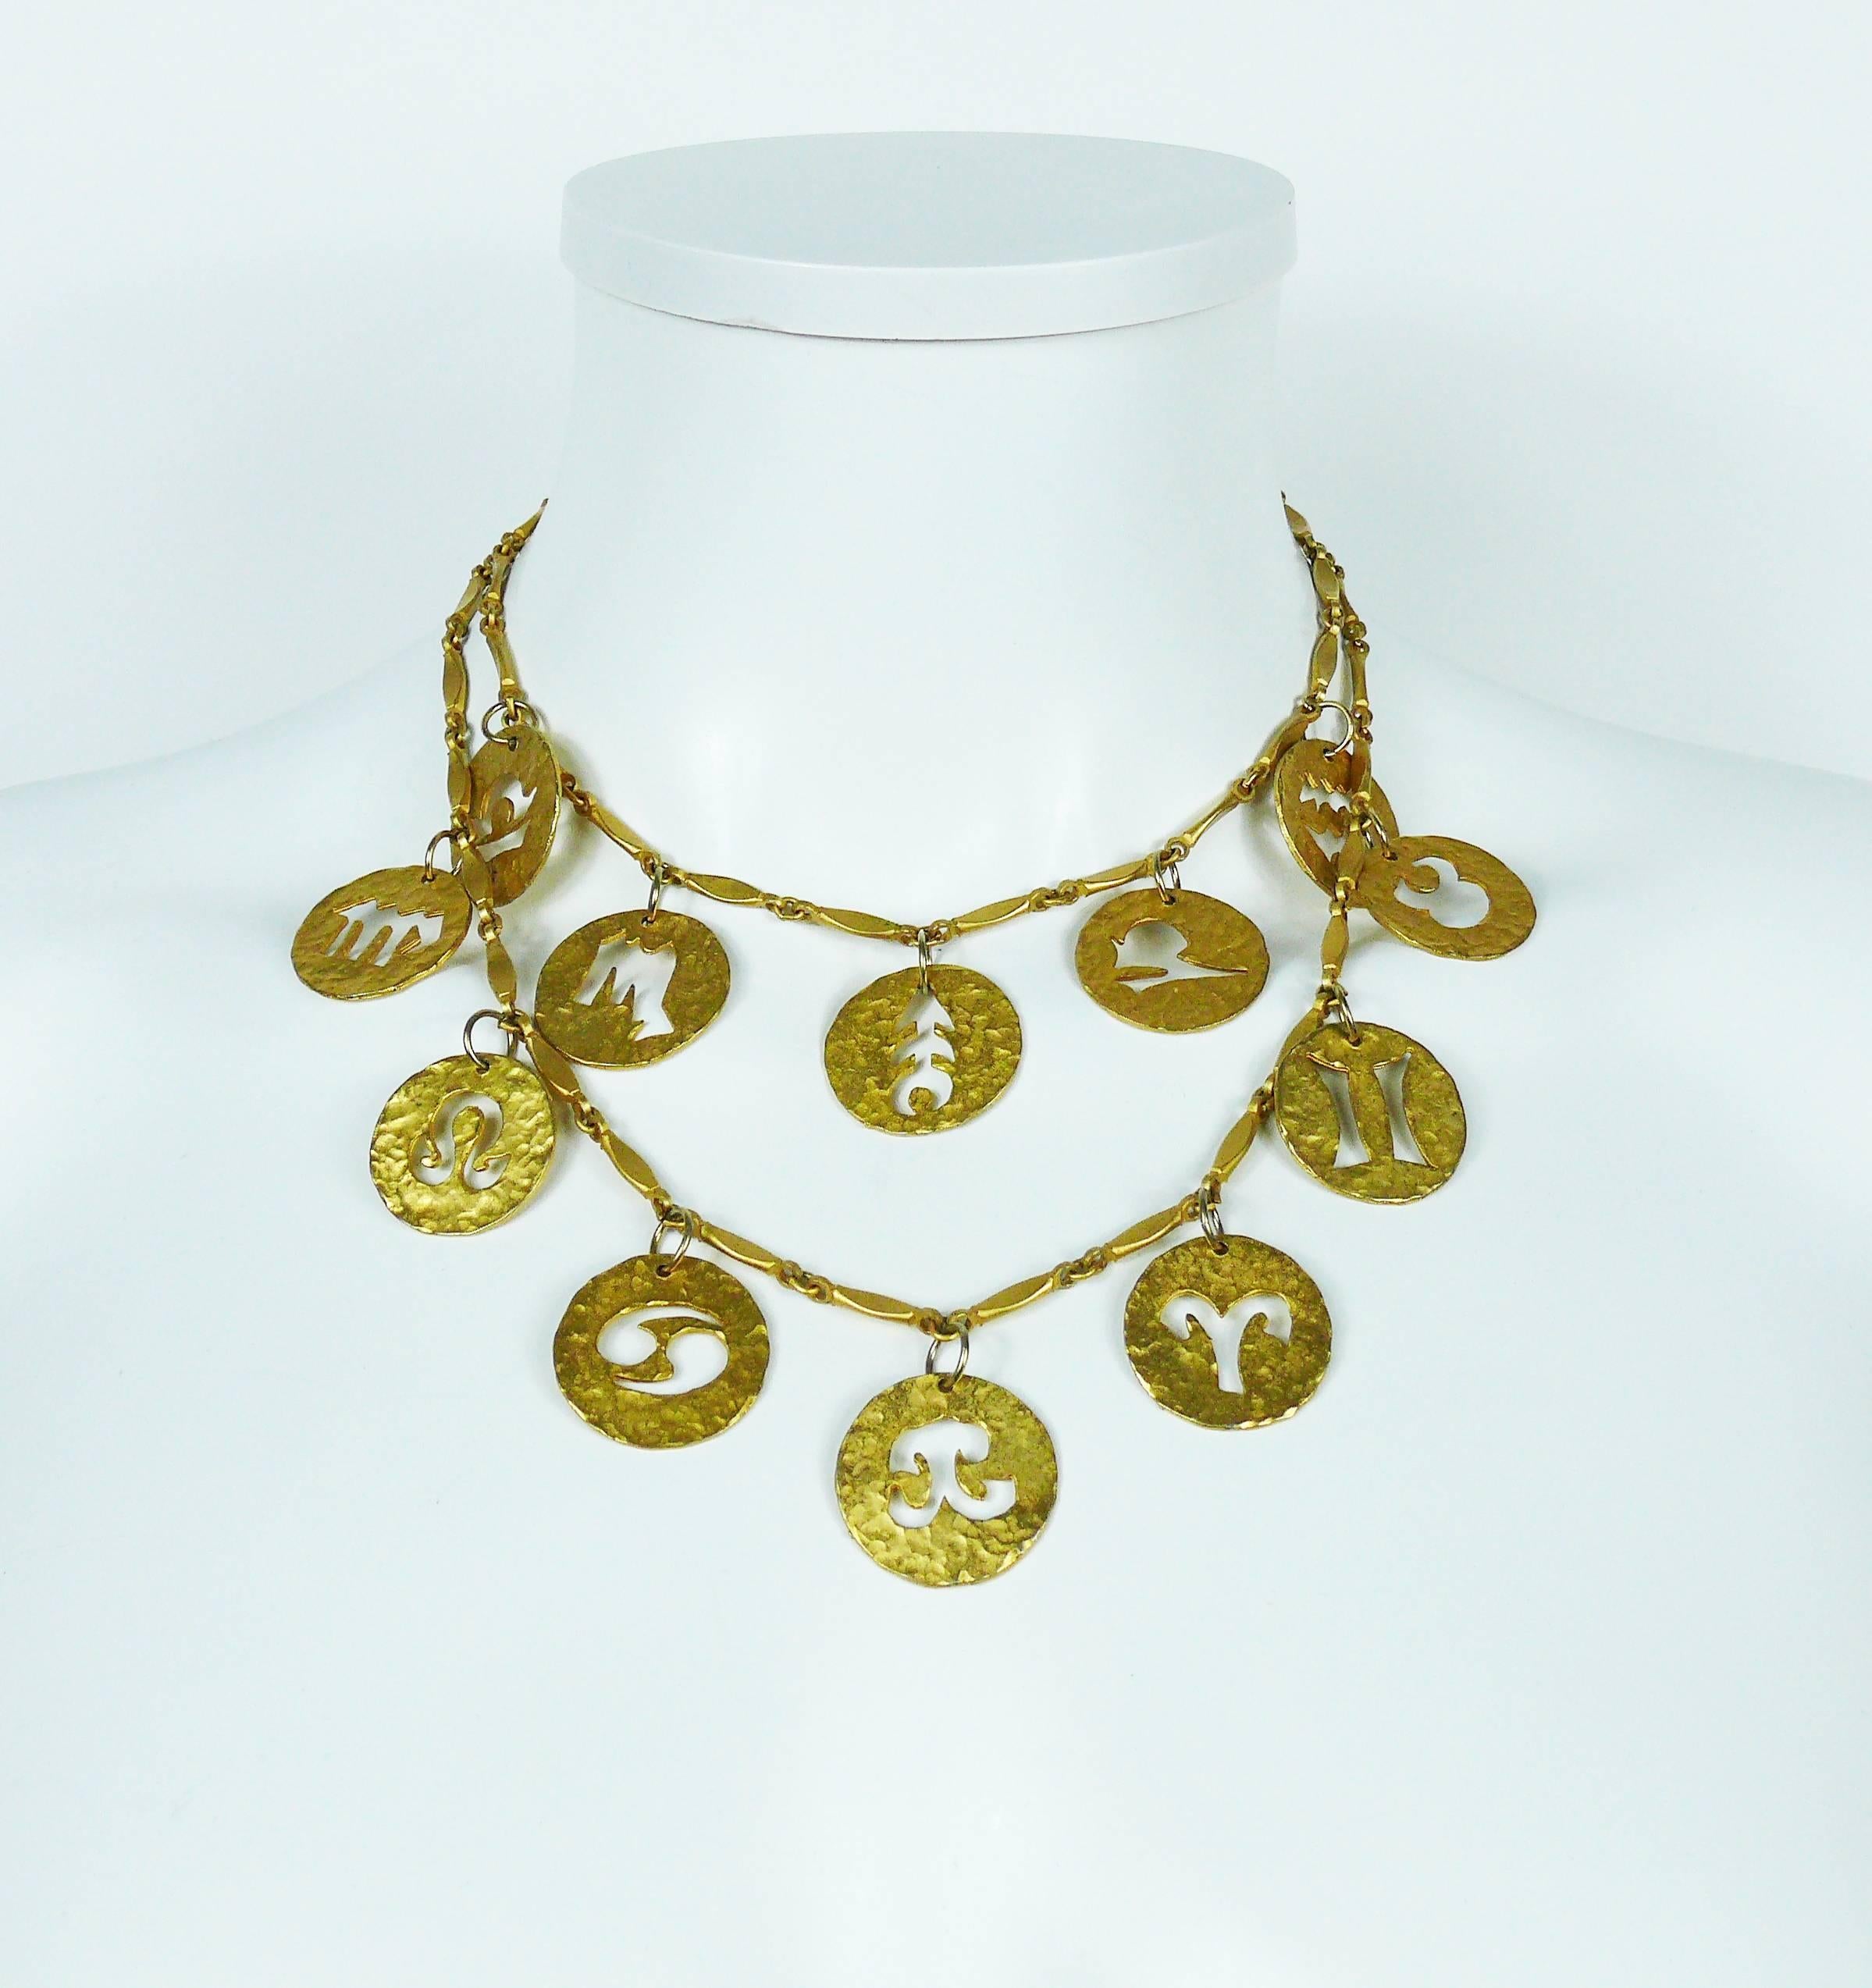 PACO RABANNE vintage matte gold toned double strand necklace featuring the 12 zodiac signs.

Created in the ateliers of Maison DESRUES in the 1990s.

Lobster clasp closure.

Marked PACO RABANNE Paris.

Indicative measurements : length approx. 37.5